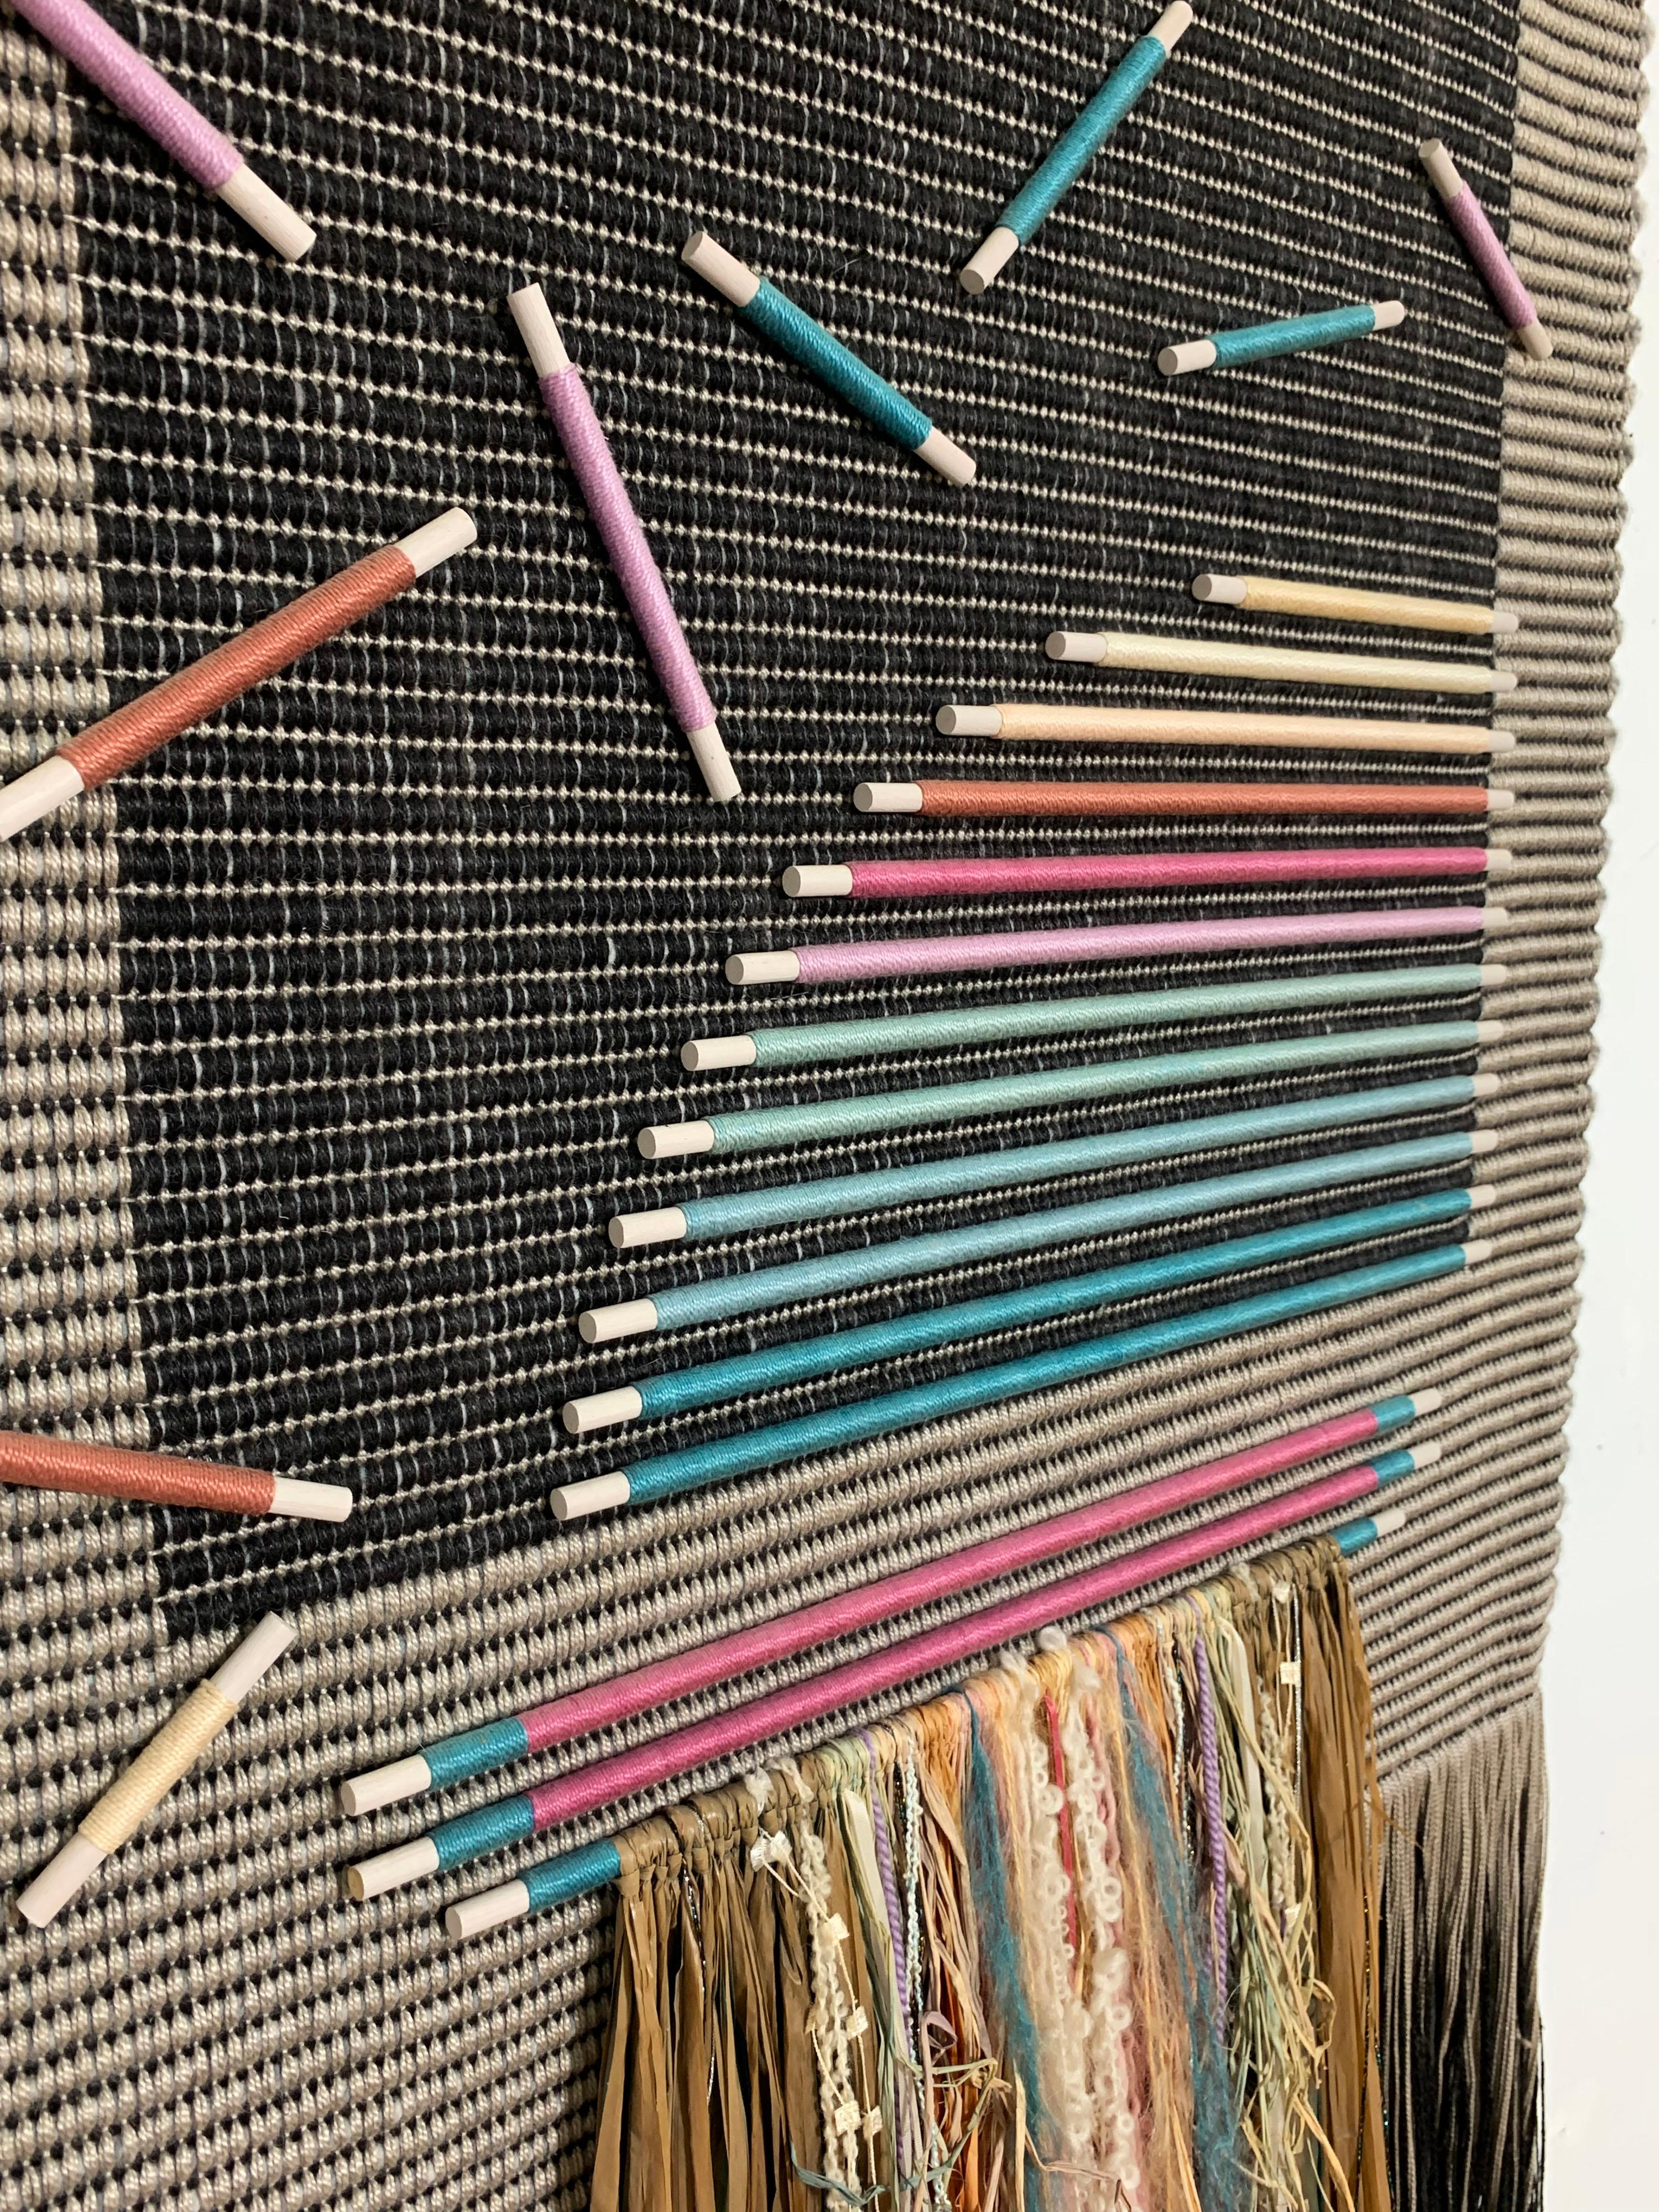 Skillfully made post-modern circa 1980s textile art weaving of twisted cotton matting applied with a scattering of wooden dowels wound in colorful silk threads. A double row of raffia ribbon and mixed fiber fringe work creates a cascading effect